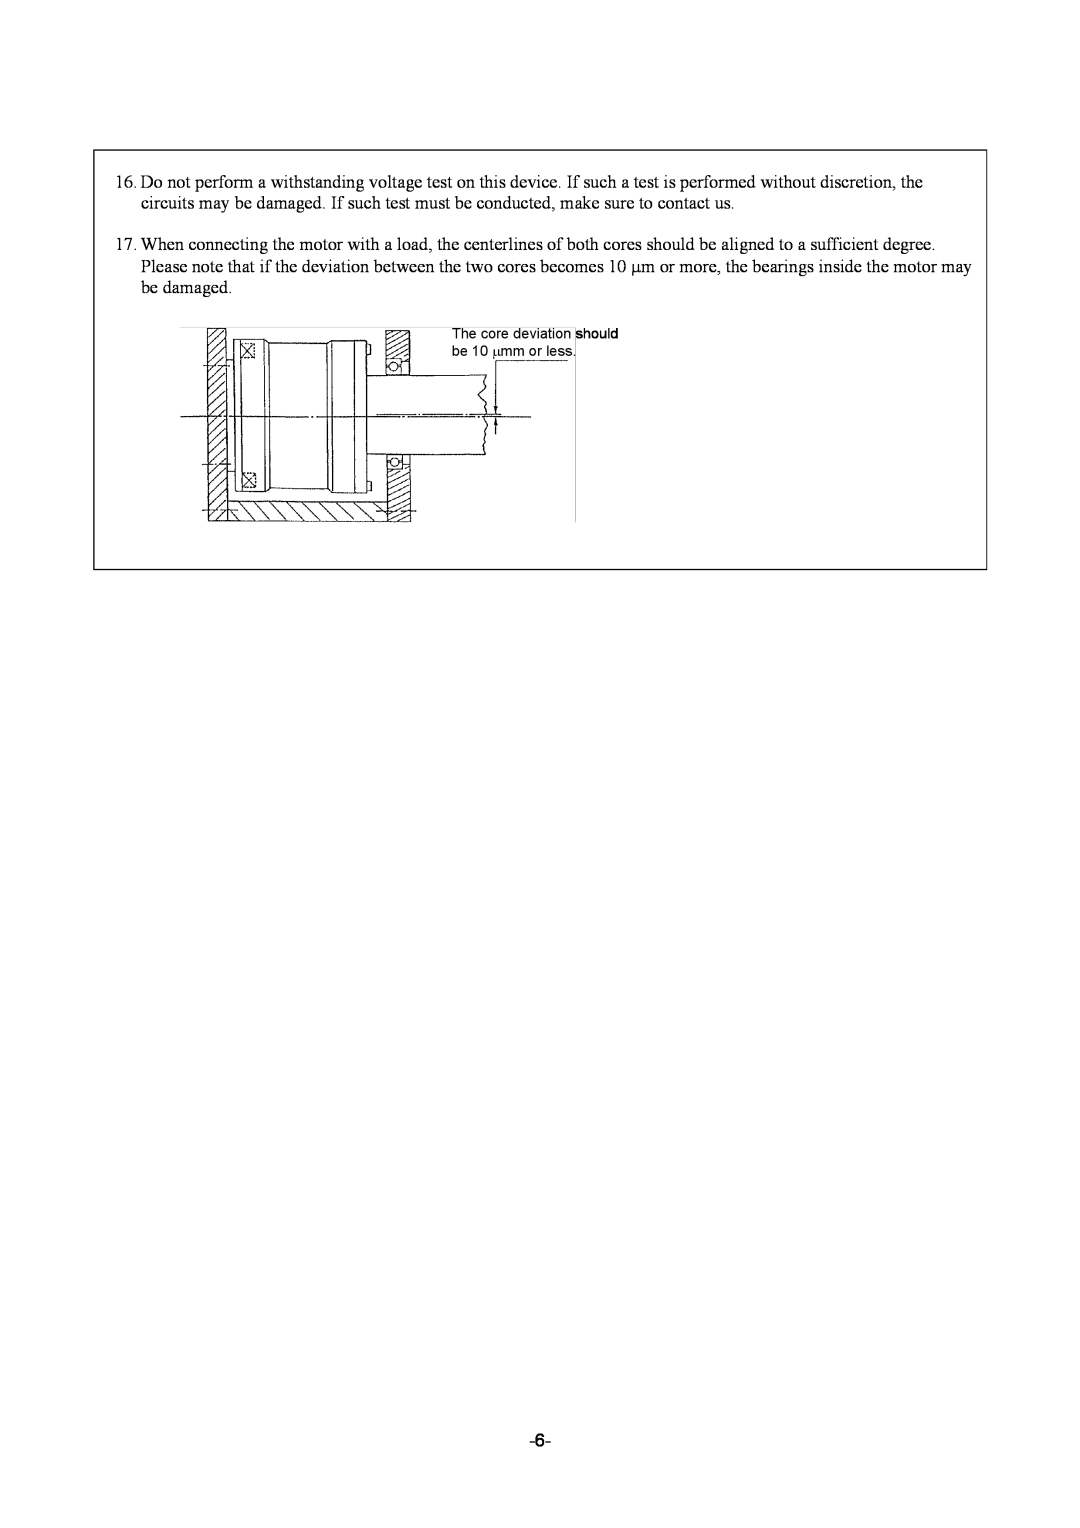 Parker Hannifin G2 manual The core deviation should be 10 ∝mm or less 